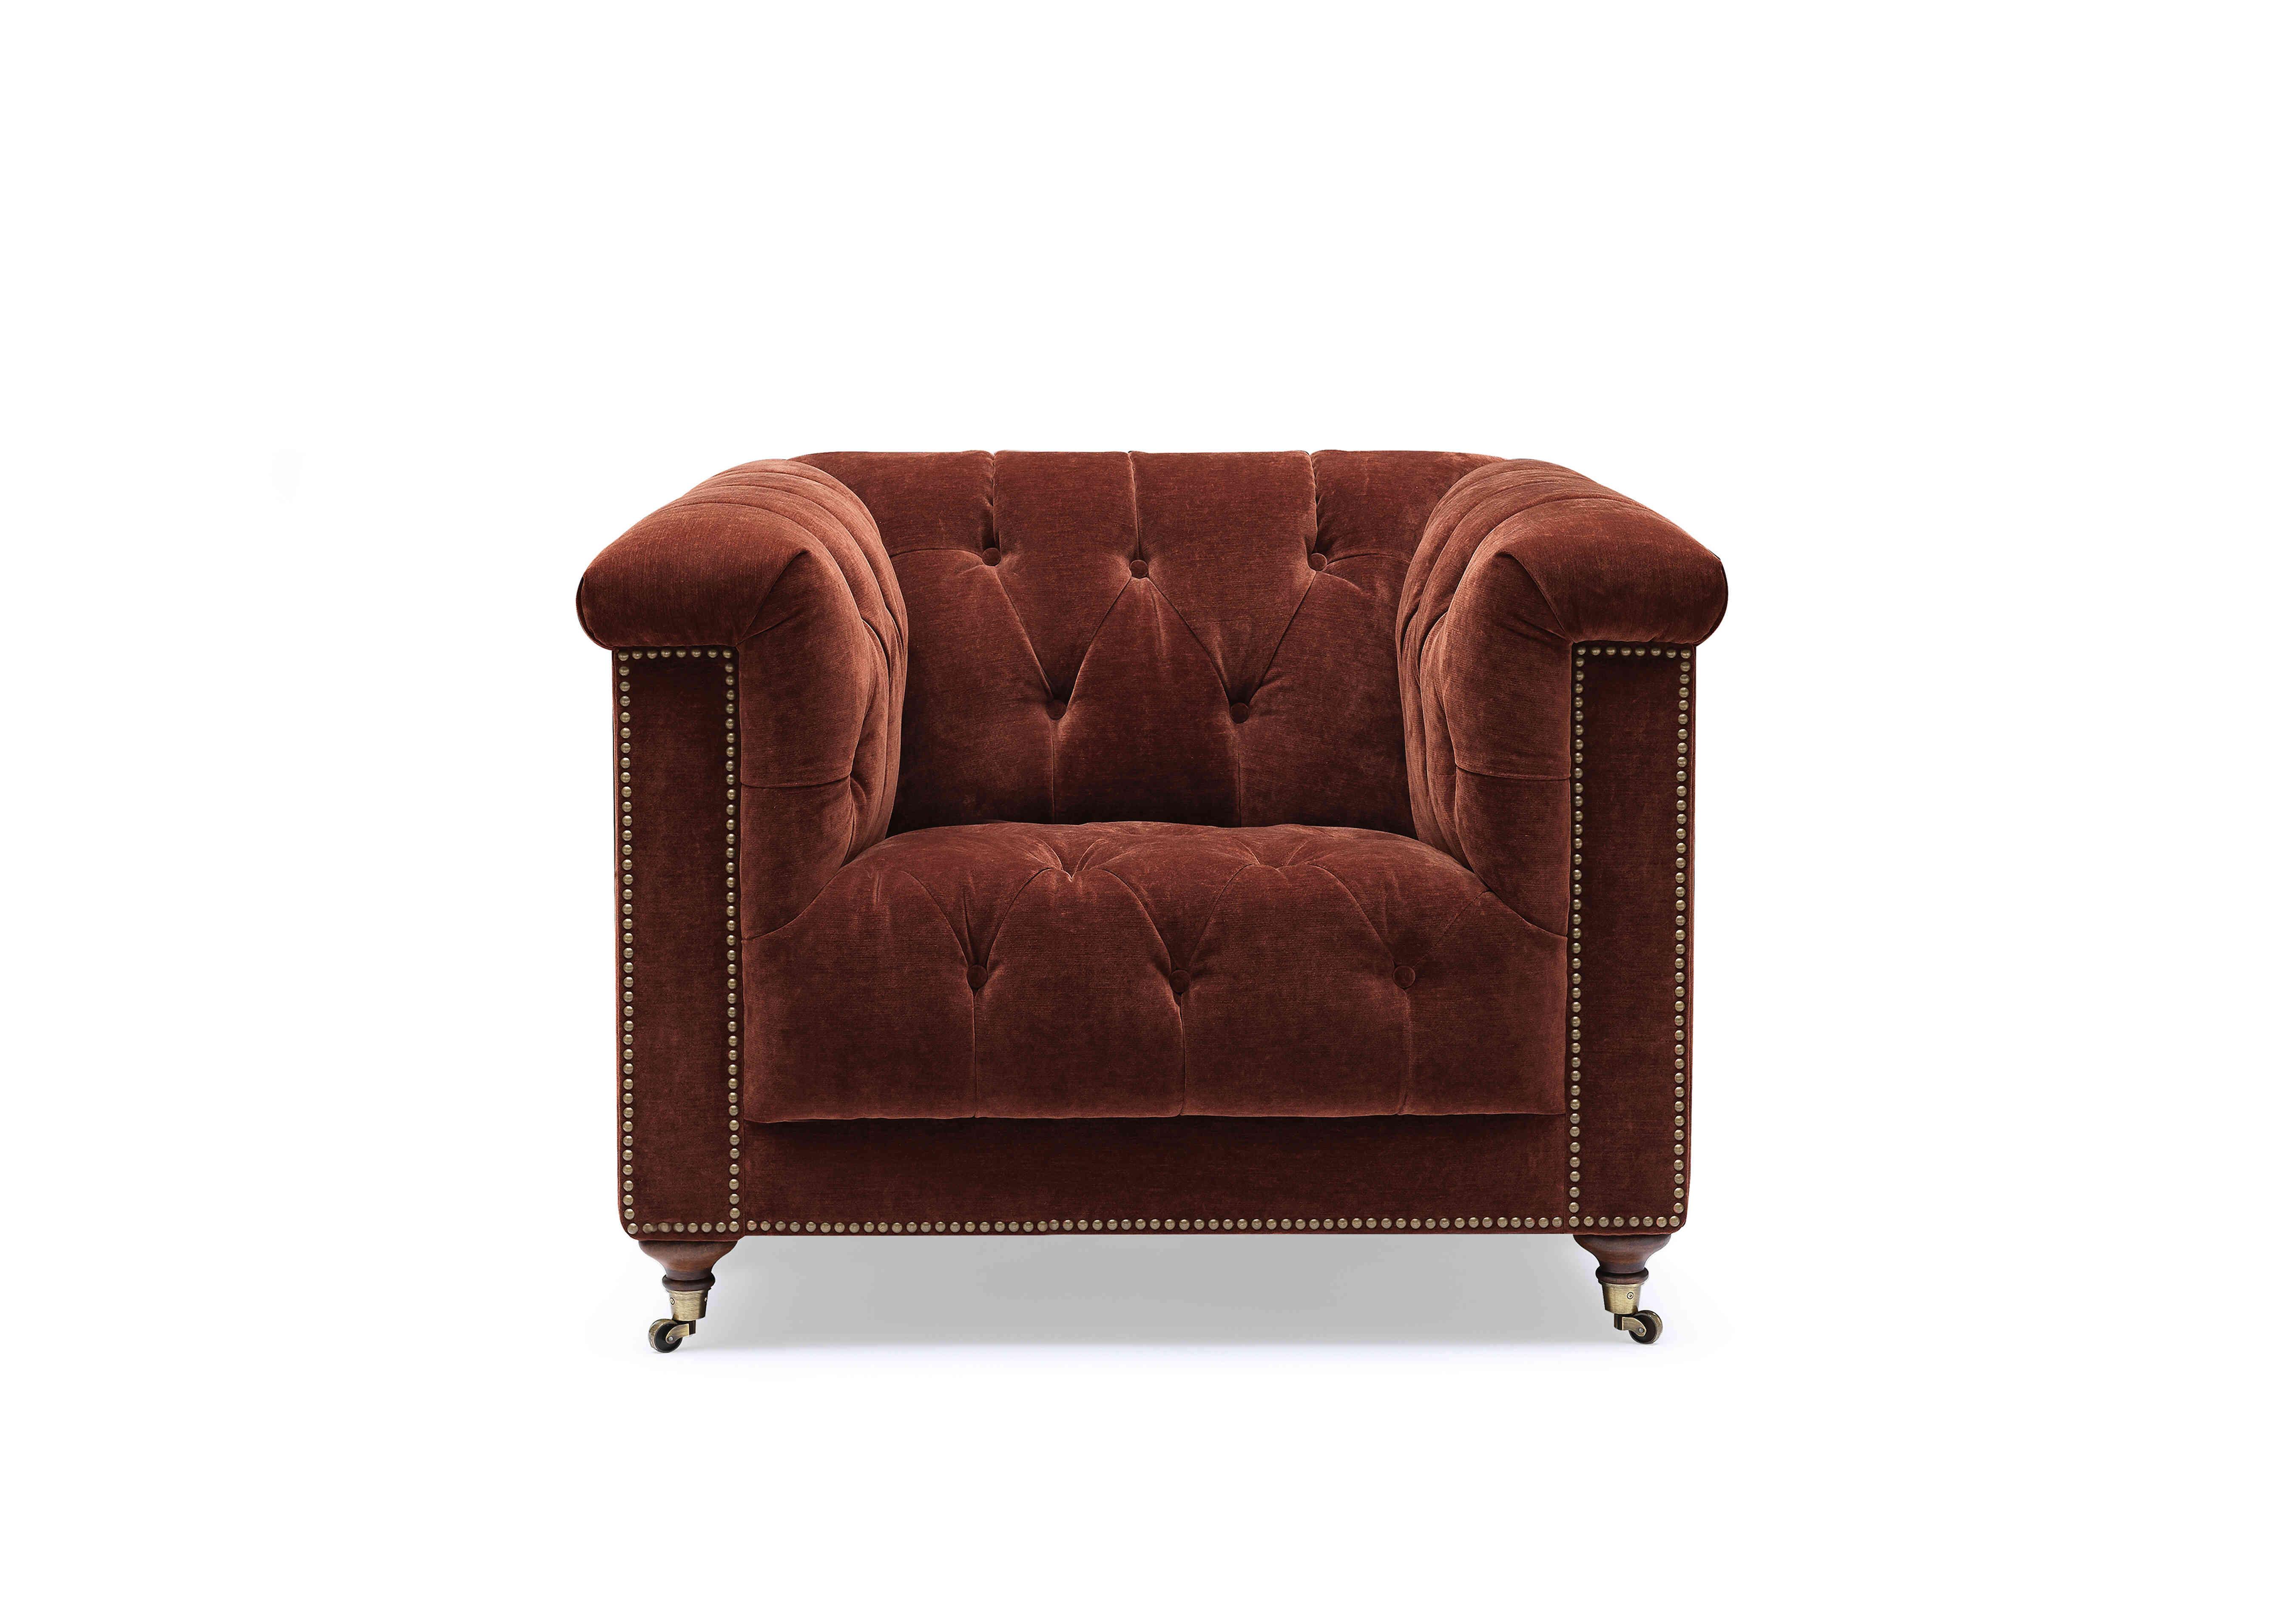 Wallace Fabric Chesterfield Chair in X3y1-W019 Tawny on Furniture Village